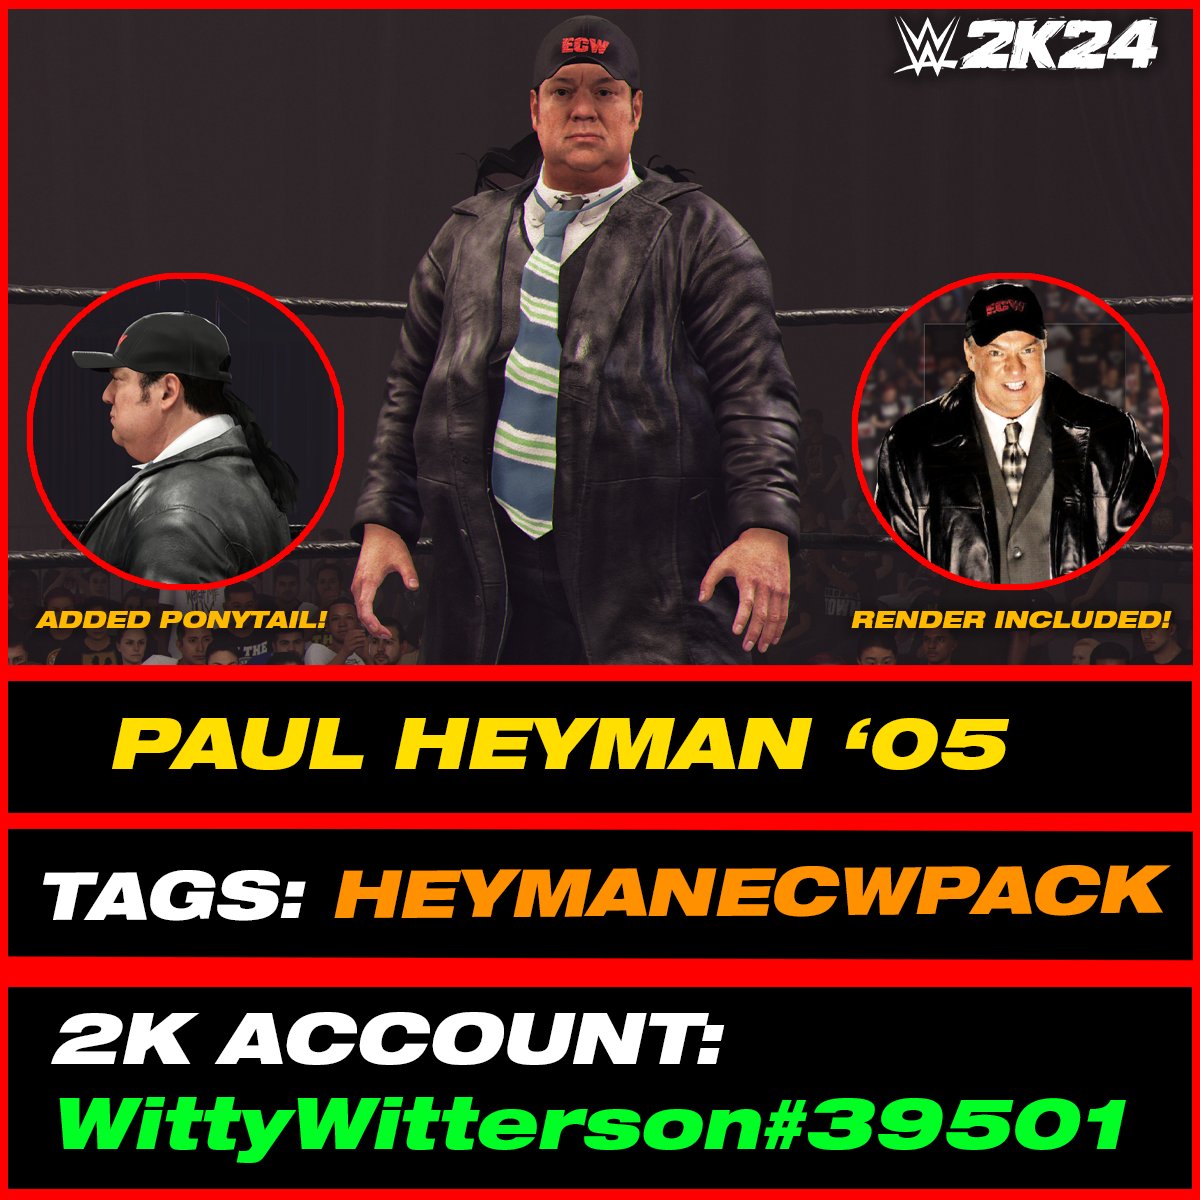 Paul Heyman '05 (In-Game Edit) is uploaded onto Community Creations #WWE2K24 

•Hashtags are: HEYMANECWPACK, WITTY226, PaulHeyman

•Collab w/ @SniperCAWS
 
INCLUDES:
• Render
• 'Paul' Call Name
• Commentary
• Added Hair

@JustBryanNY @LexxGotNext